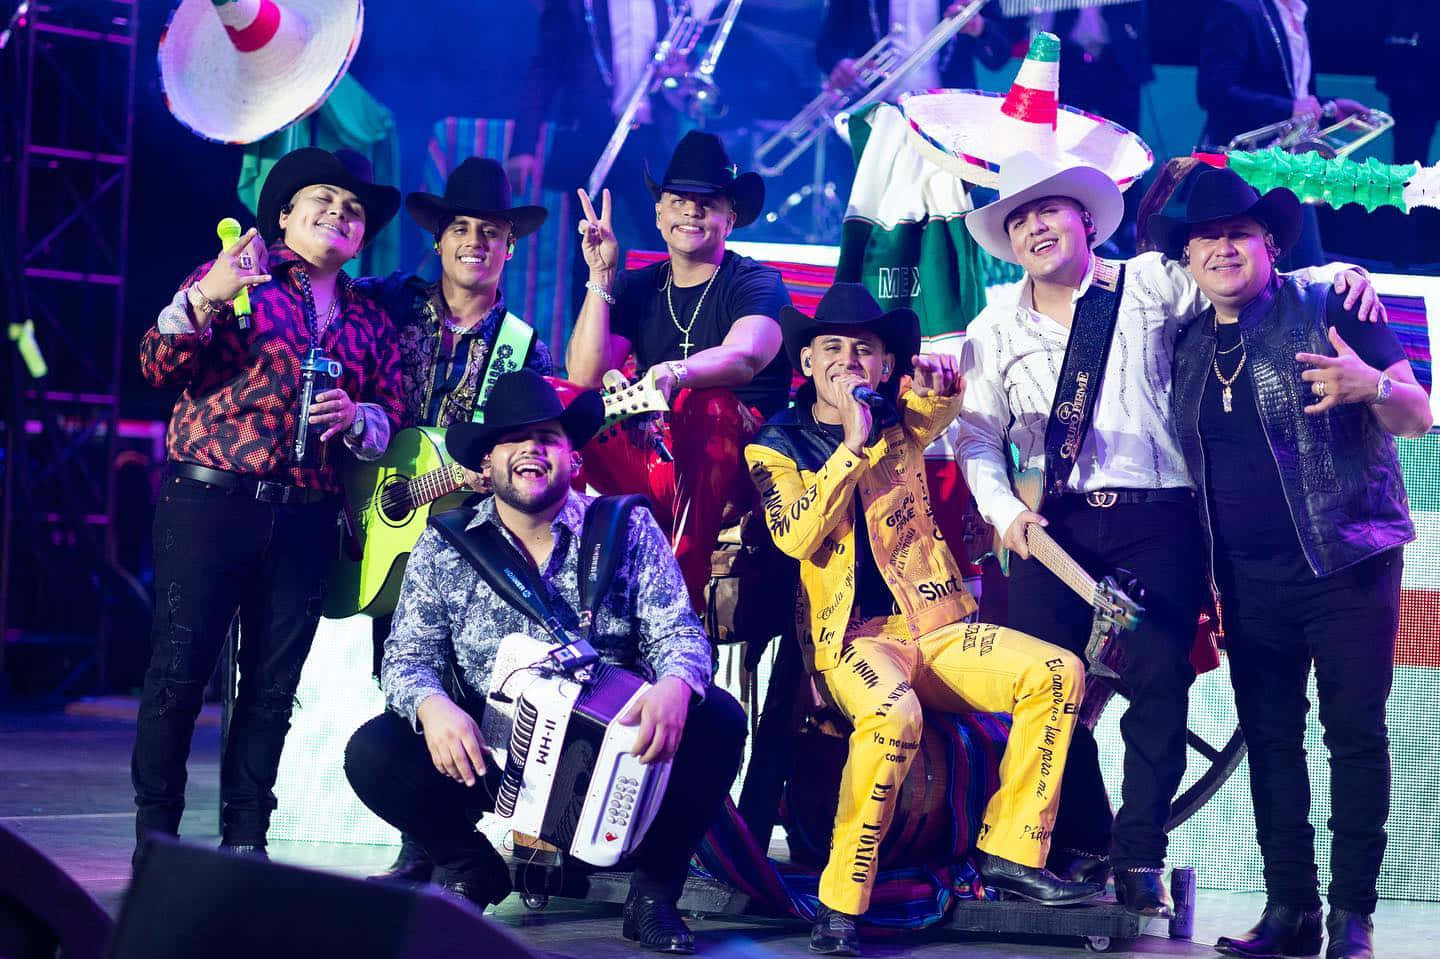 A Group Of Men In Hats And Costumes Posing For A Photo Wallpaper